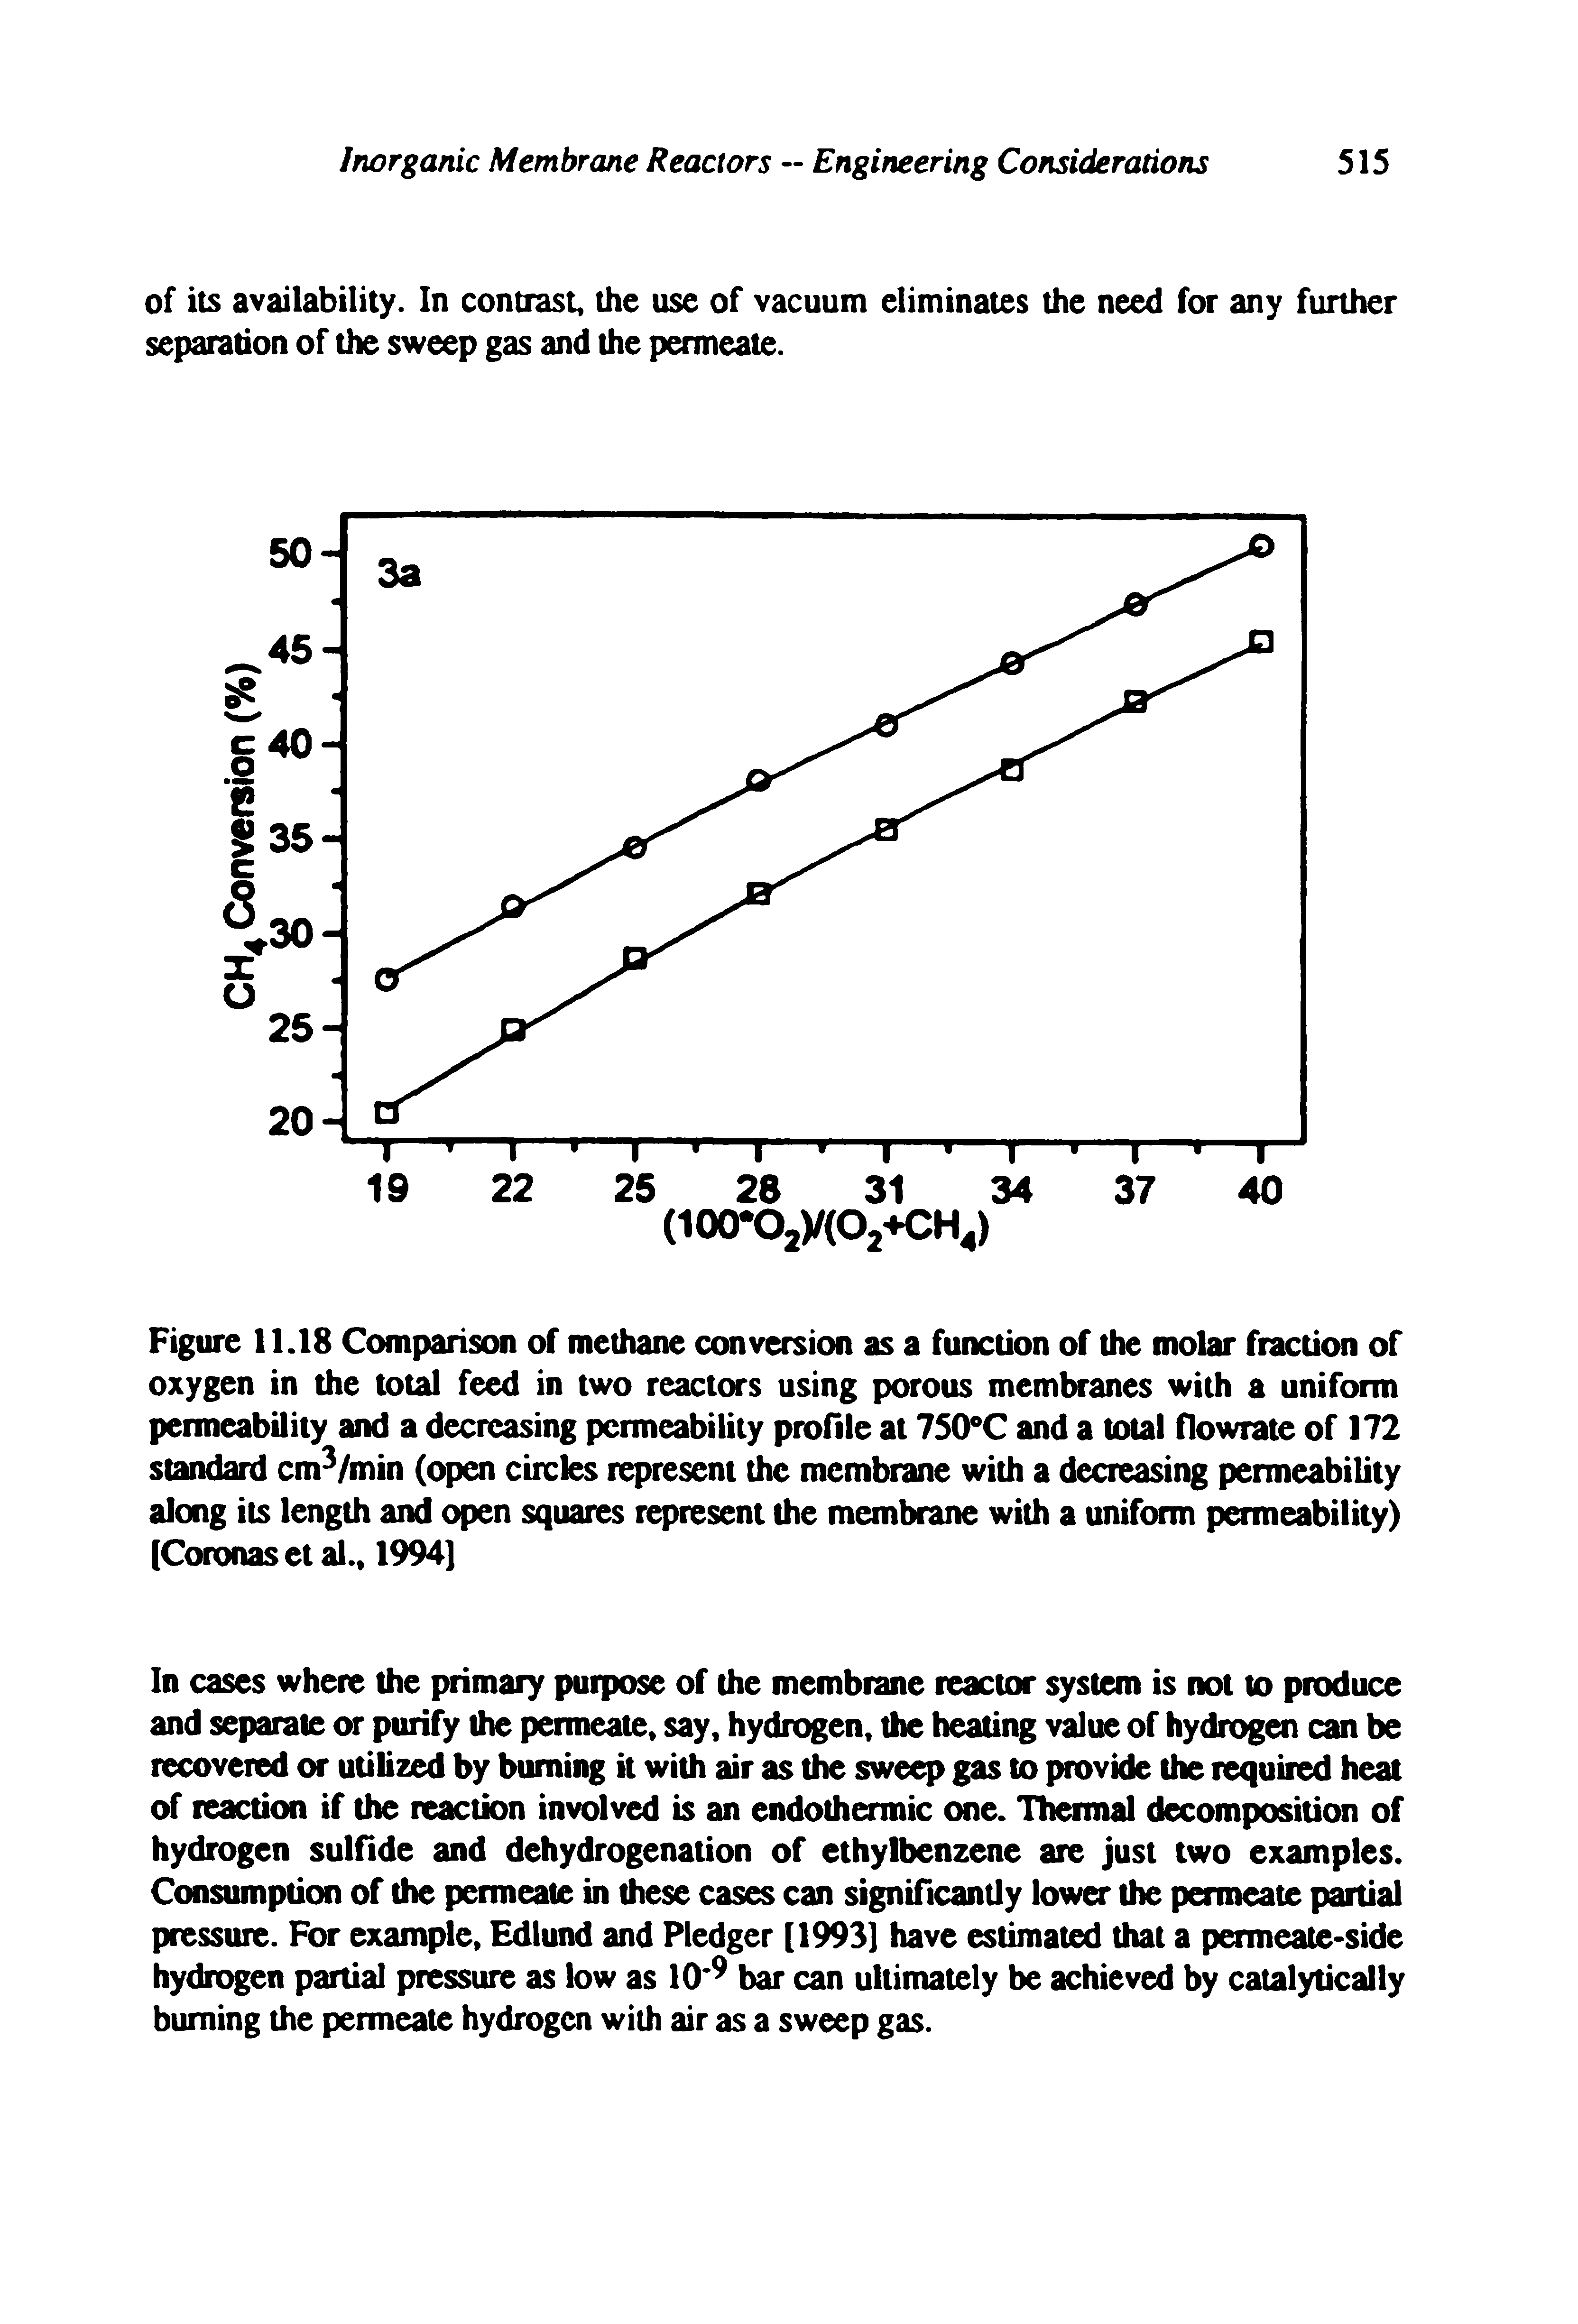 Figure 11.18 Comparison of methane conversion as a function of the molar fraction of oxygen in the total feed in two reactors using porous membranes with a uniform permeability and a decreasing permeability profile at 750 C and a total flowrate of 172 standard cm /min (open circles represent the membrane with a decreasing permeability along its length and open squares represent the membrane with a uniform permeability) (Coronas et al., 1994J...